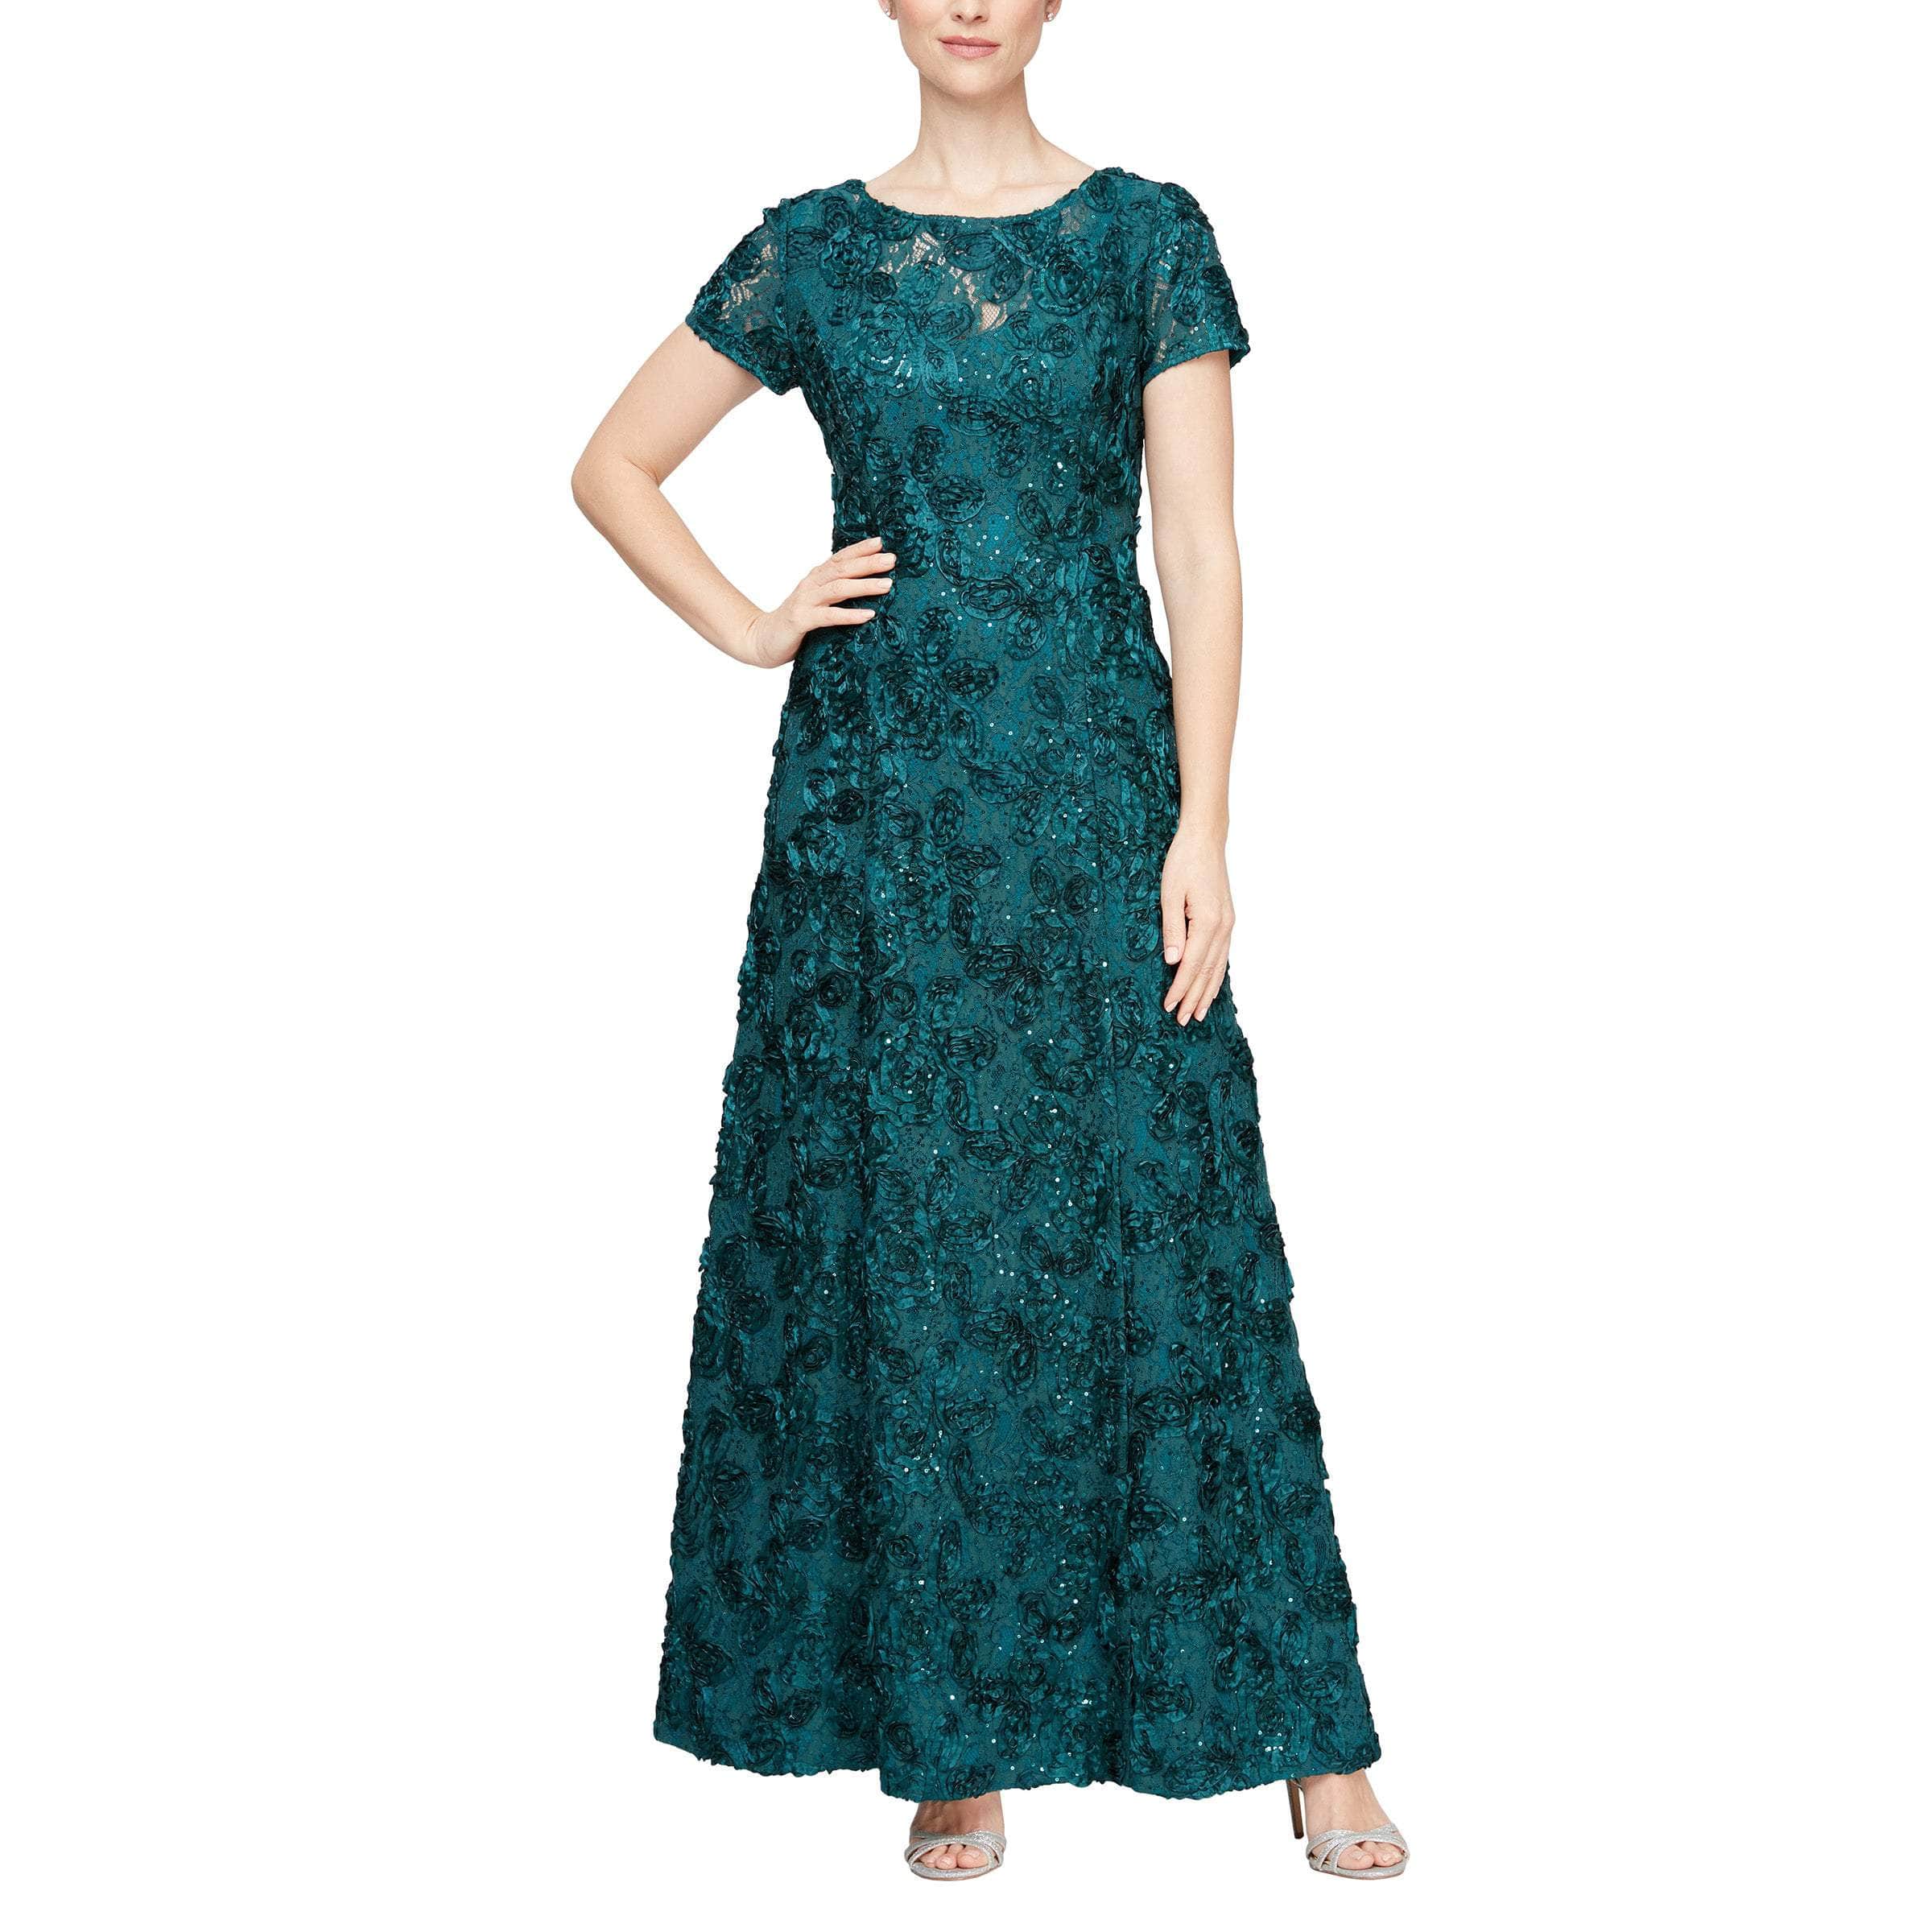 Cap Sleeves Olive Green Lace Mother of the Bride Dresses · dressydances ·  Online Store Powered by Storenvy